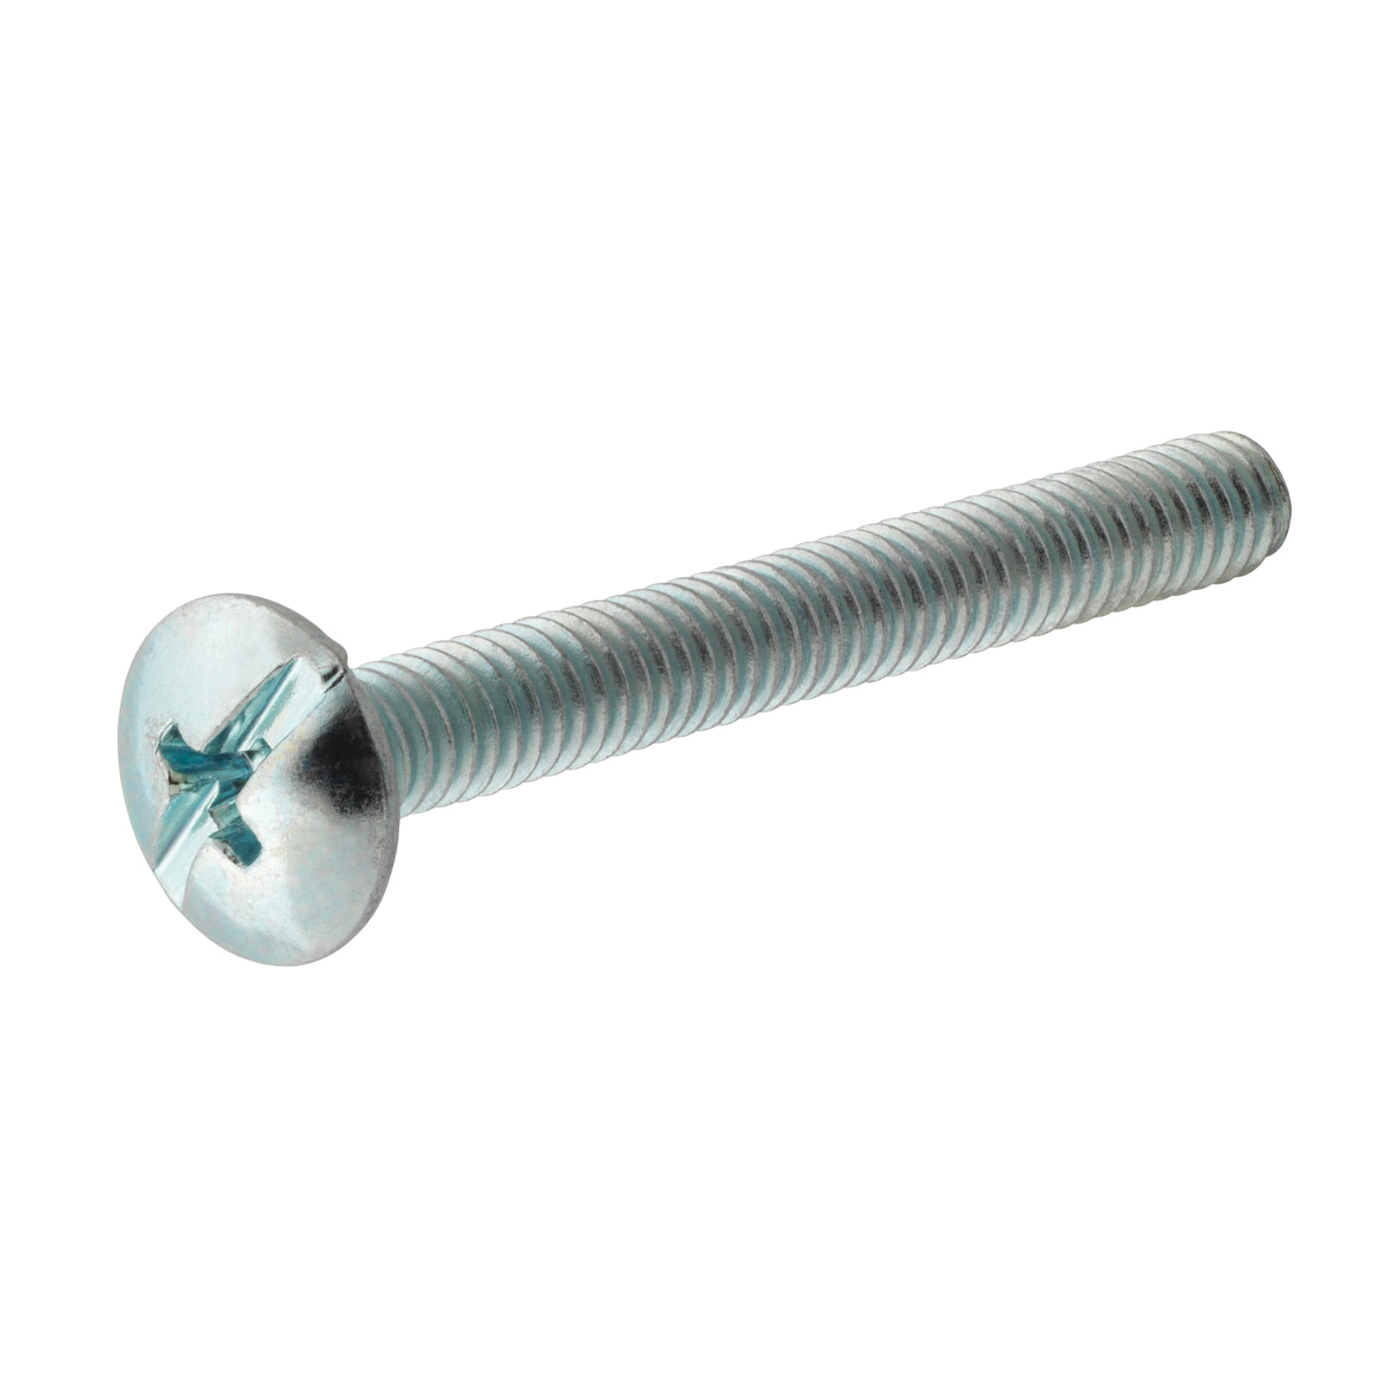 881051 Machine Screw, #8-32 Thread, 1-3/4 in L, Truss Head, Phillips, Slotted Drive, Stainless Steel